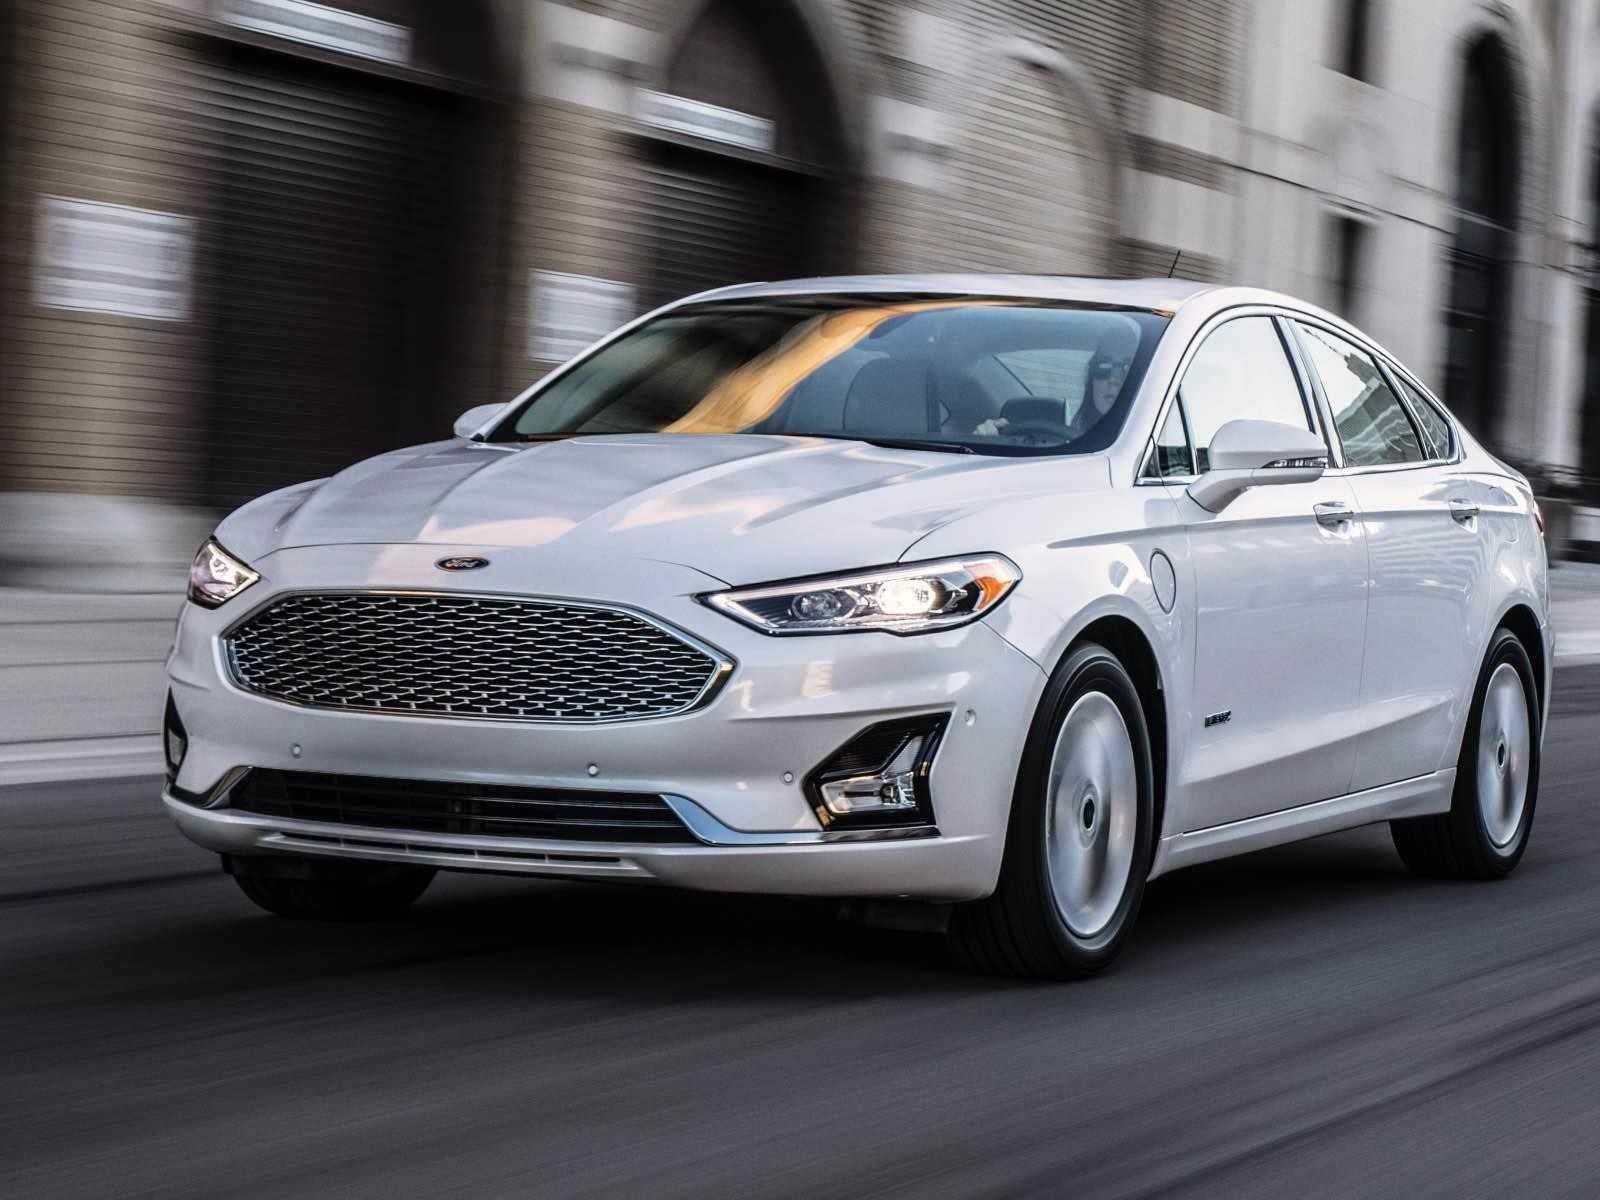 New Lease 2022 Ford Fusion At Autolux Sales And Leasing